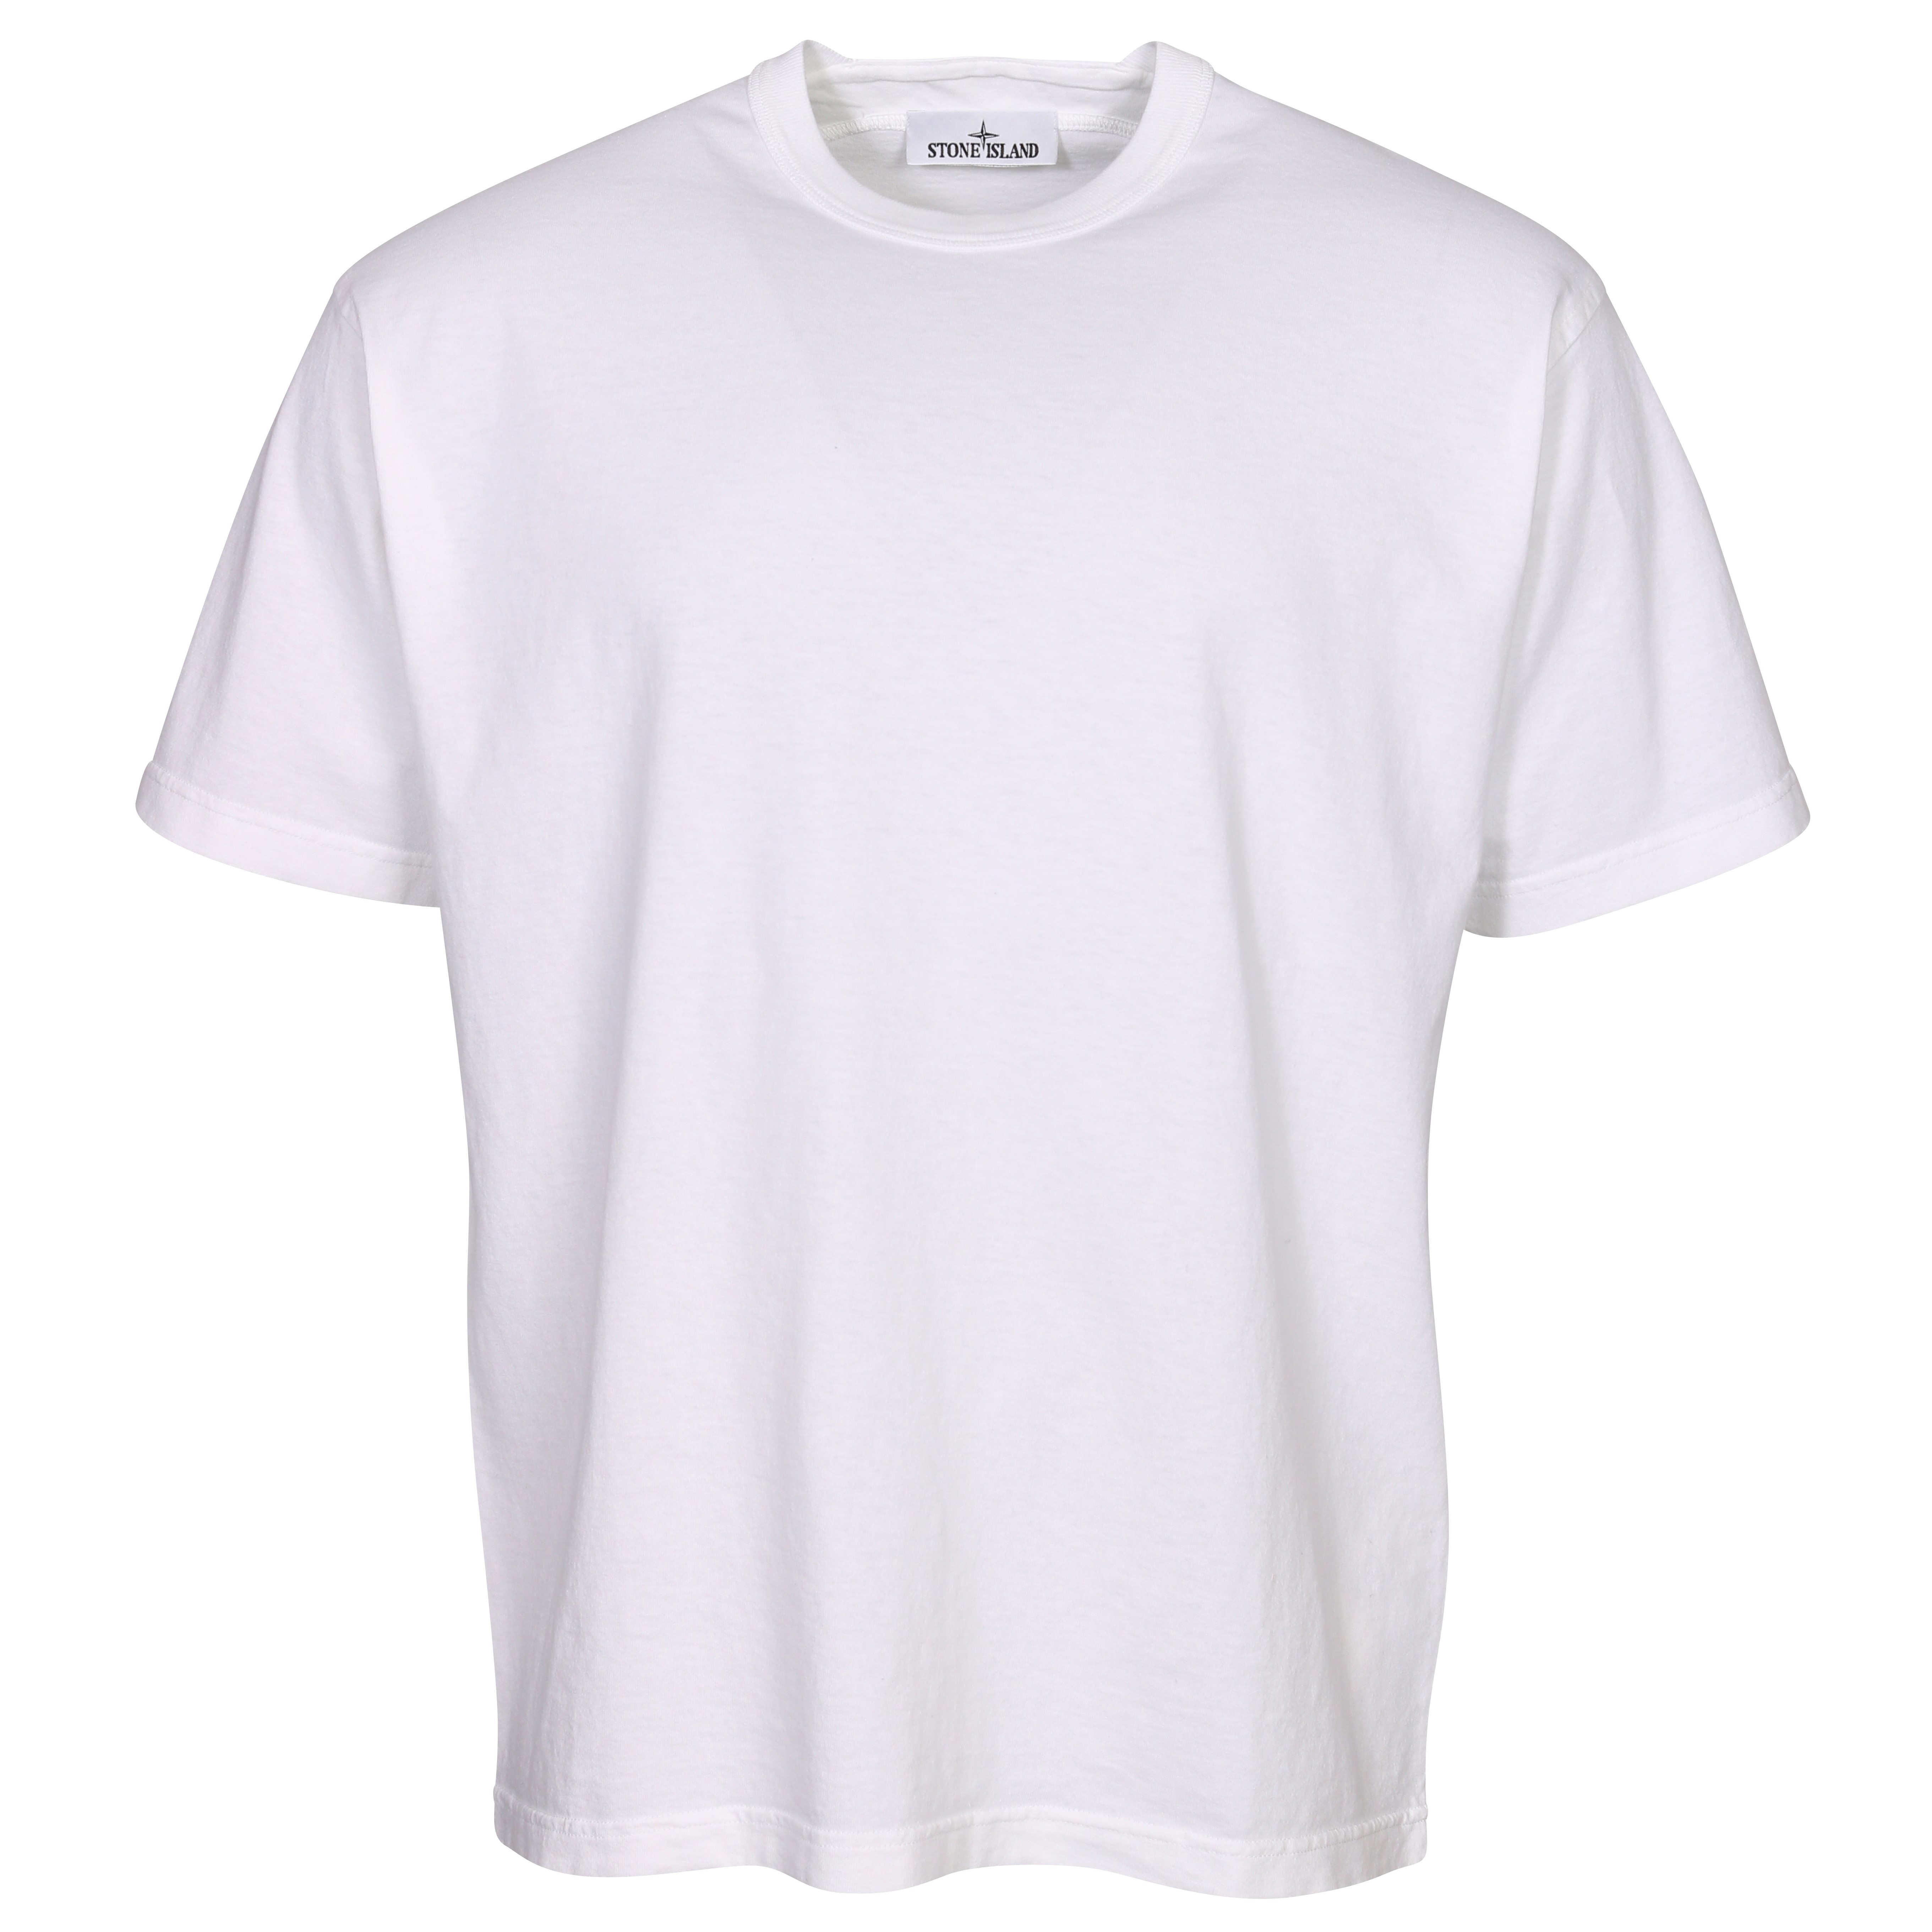 Stone Island Oversized T-Shirt in White L